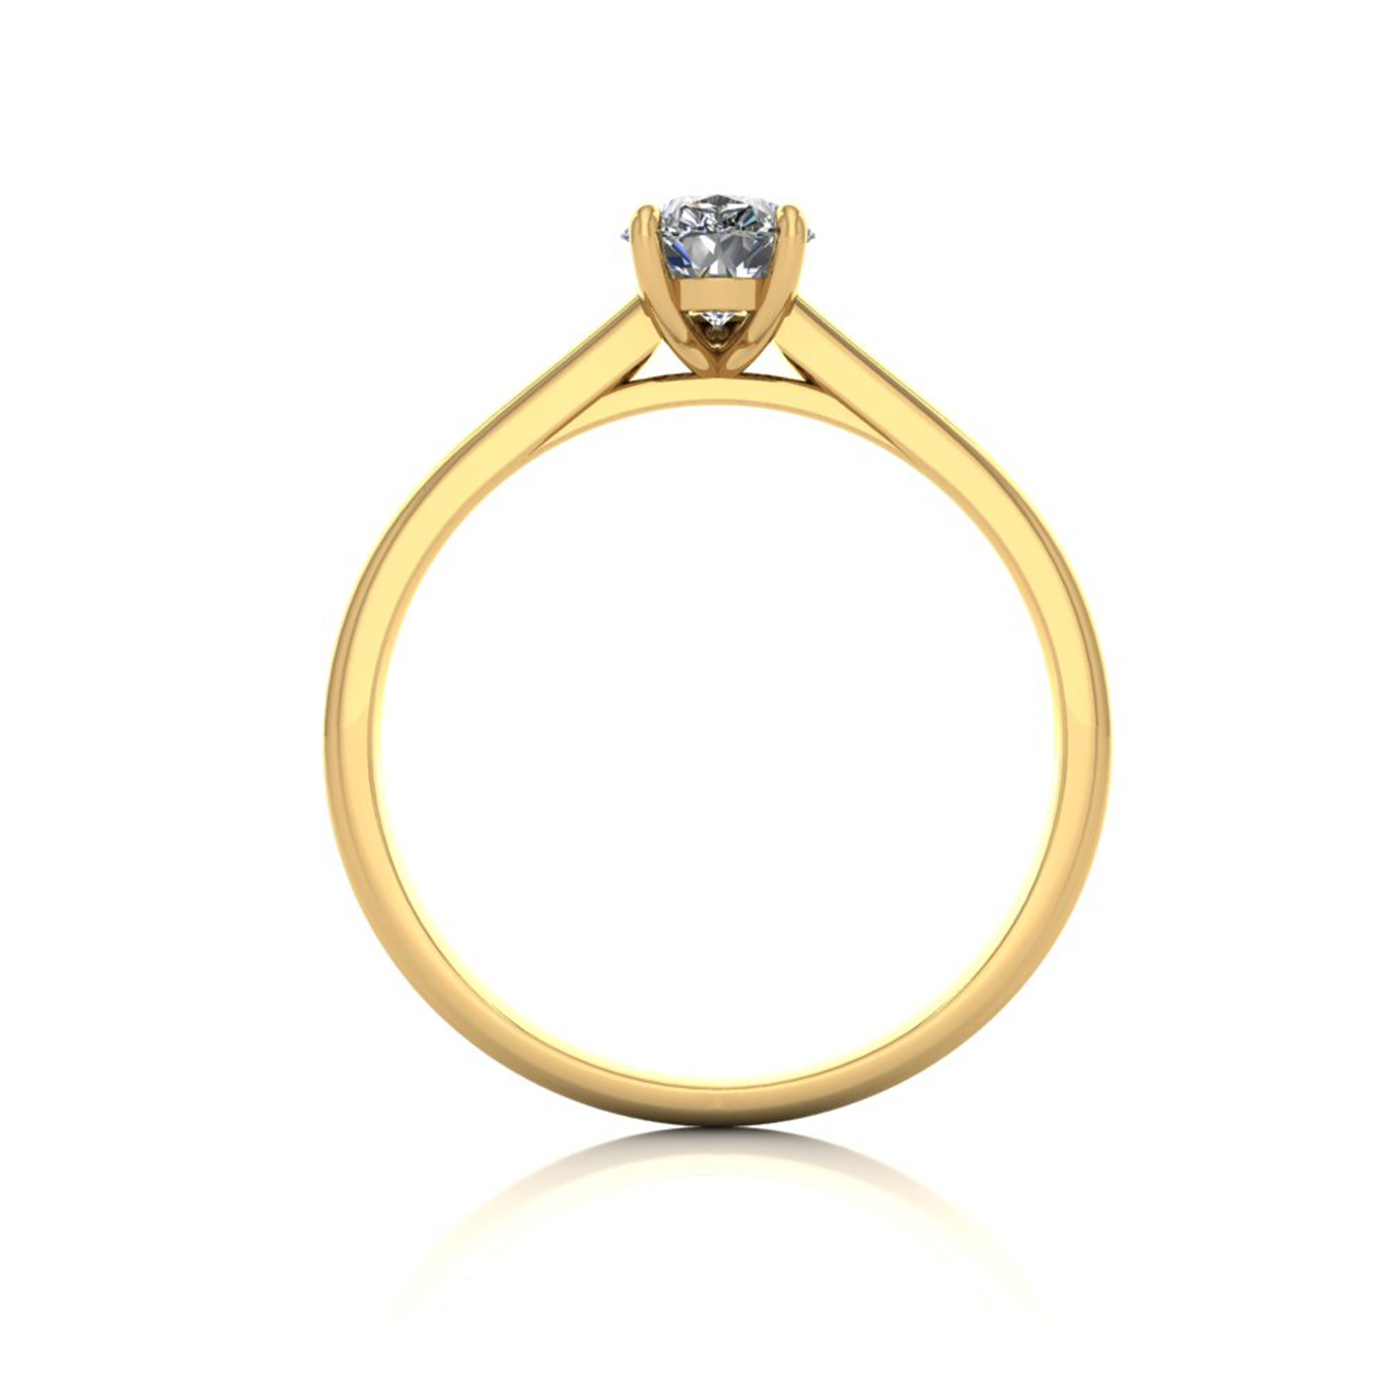 18k yellow gold  0,80 ct 3 prongs solitaire pear cut diamond engagement ring with whisper thin band